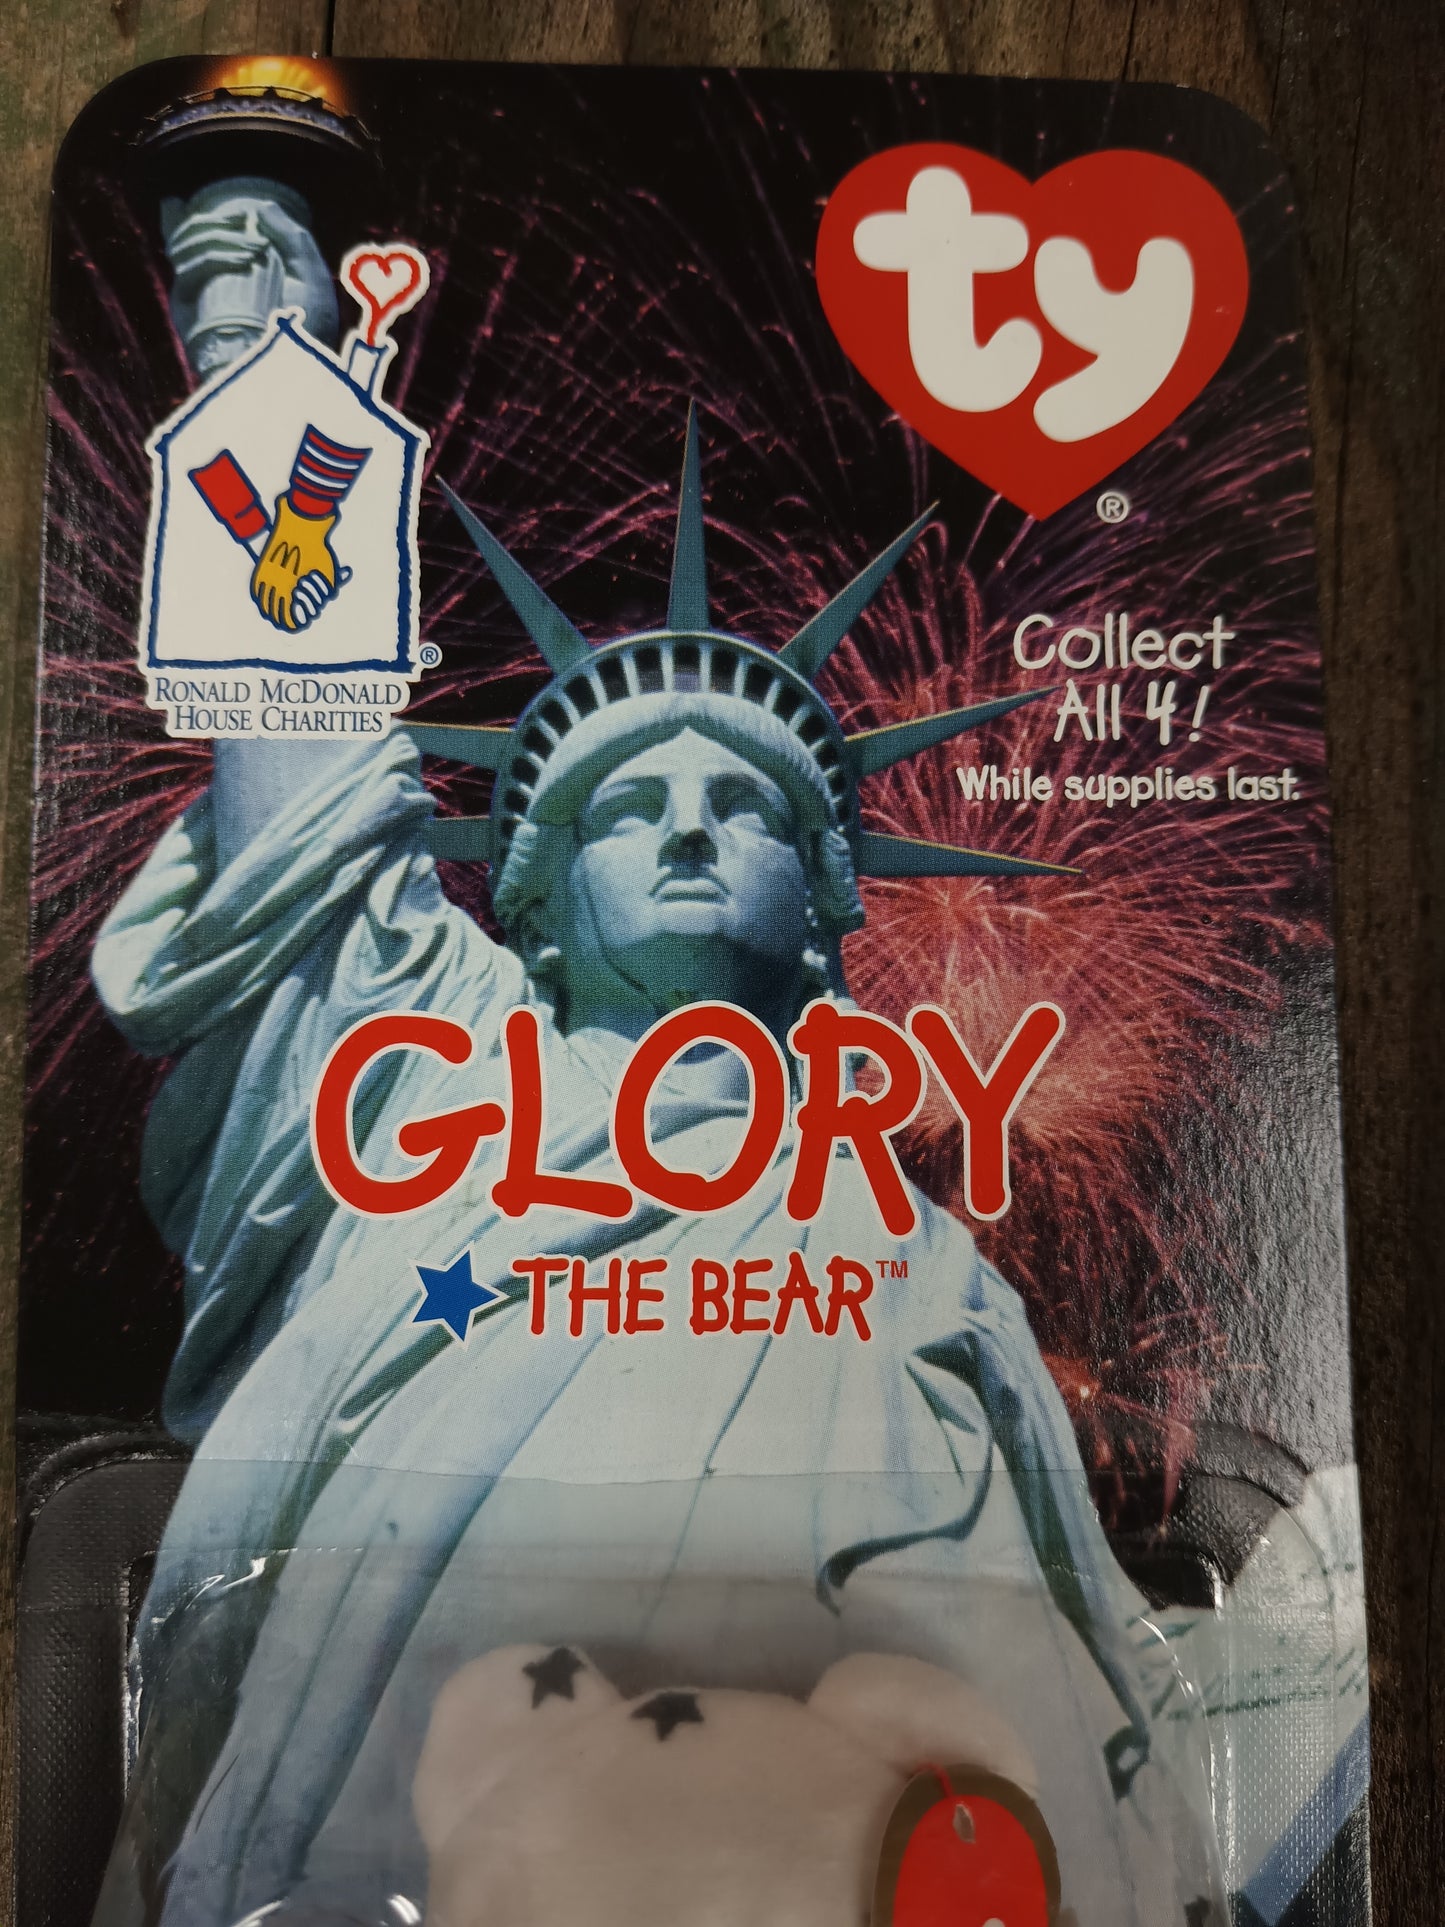 *Beanie Baby Bear "Glory The Bear" McDonalds Limited Collection Statue of Liberty